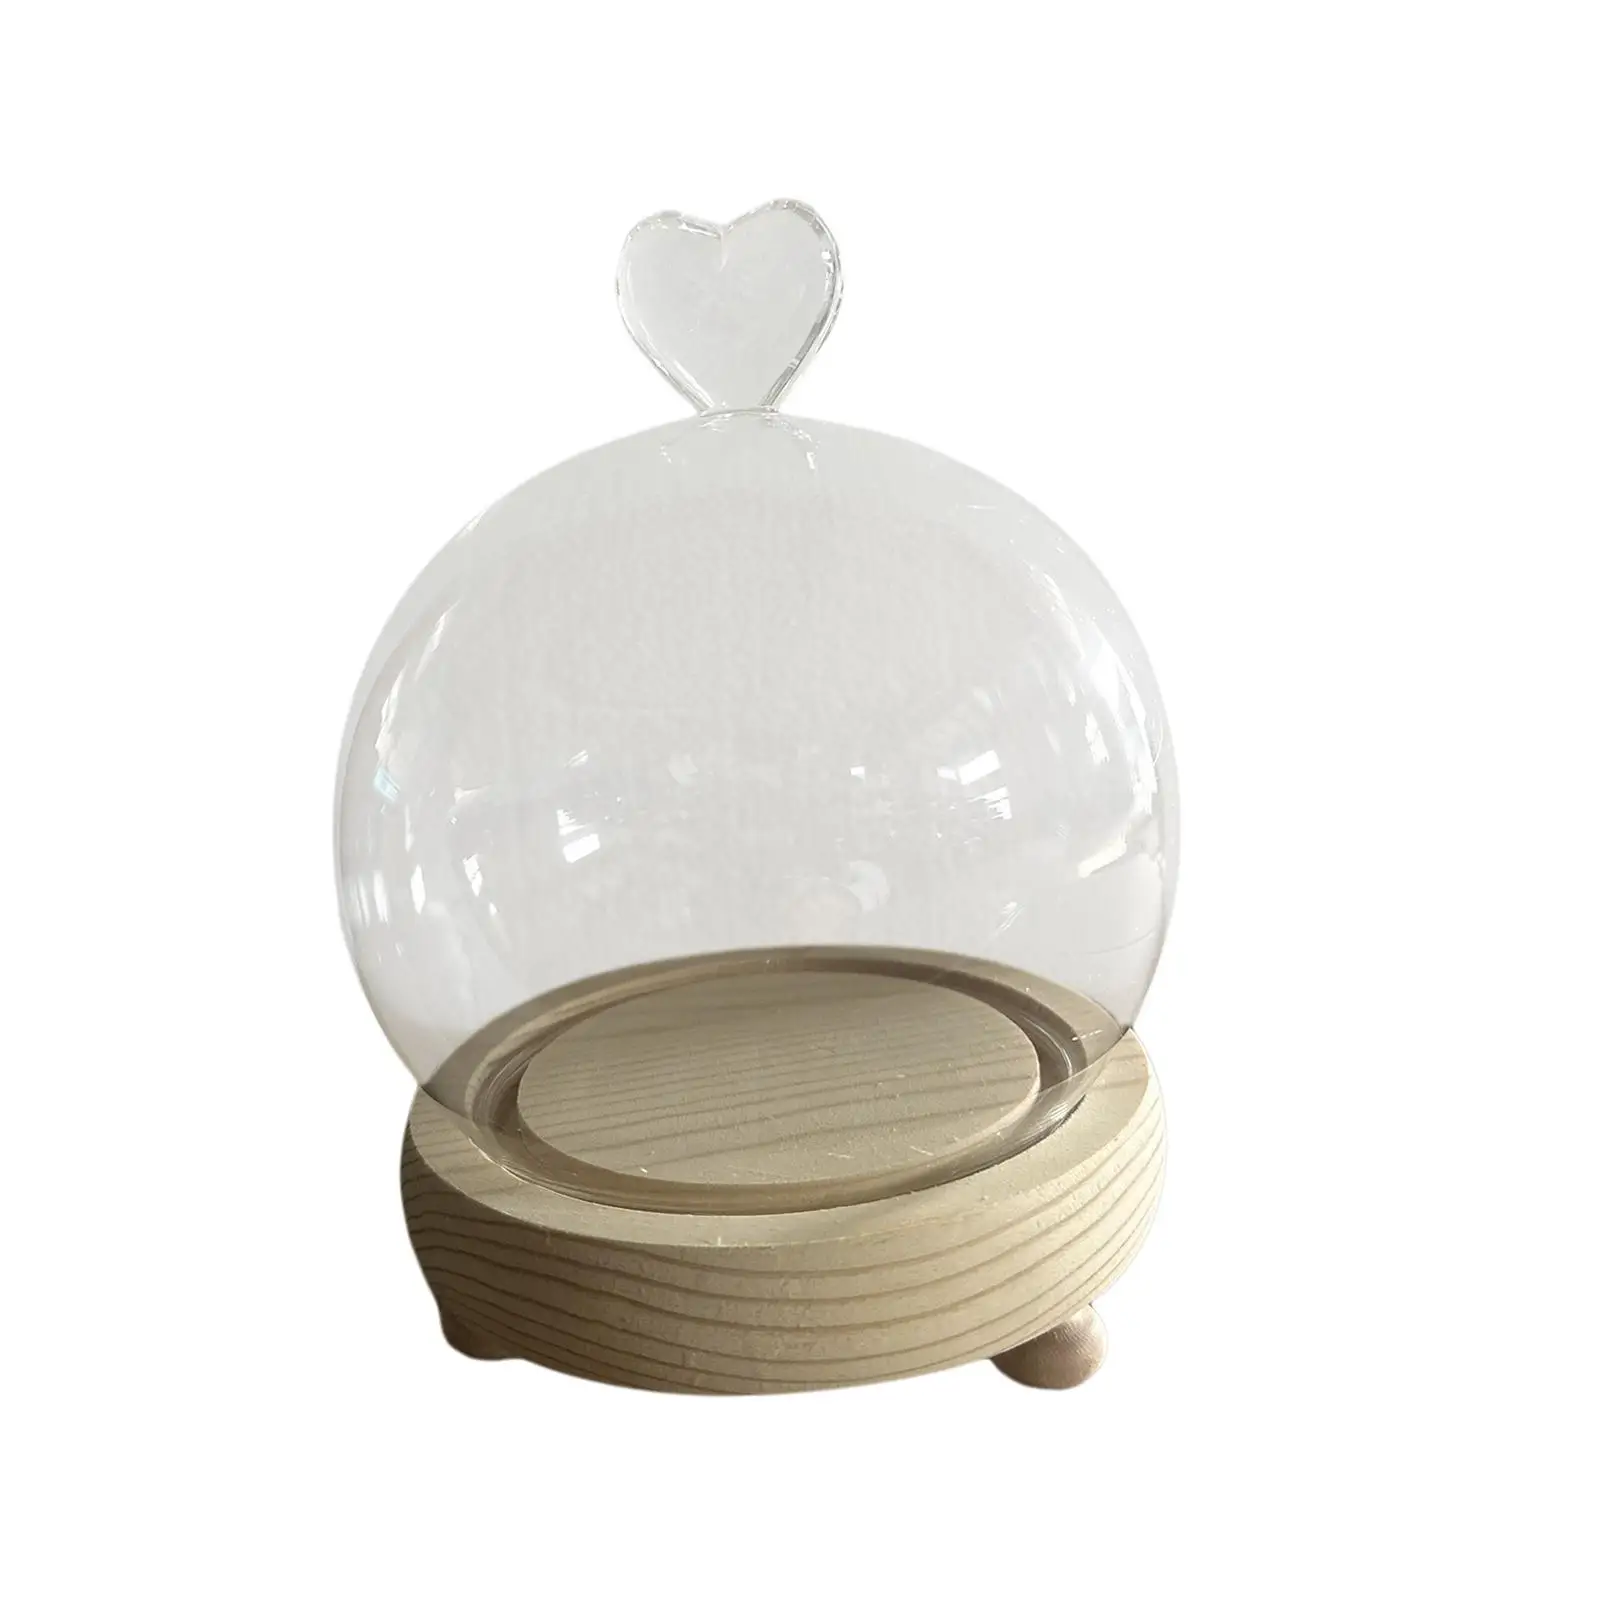 Display Dome with Wooden Base Glass Dome Showcase Clear Birthday Gifts Glass